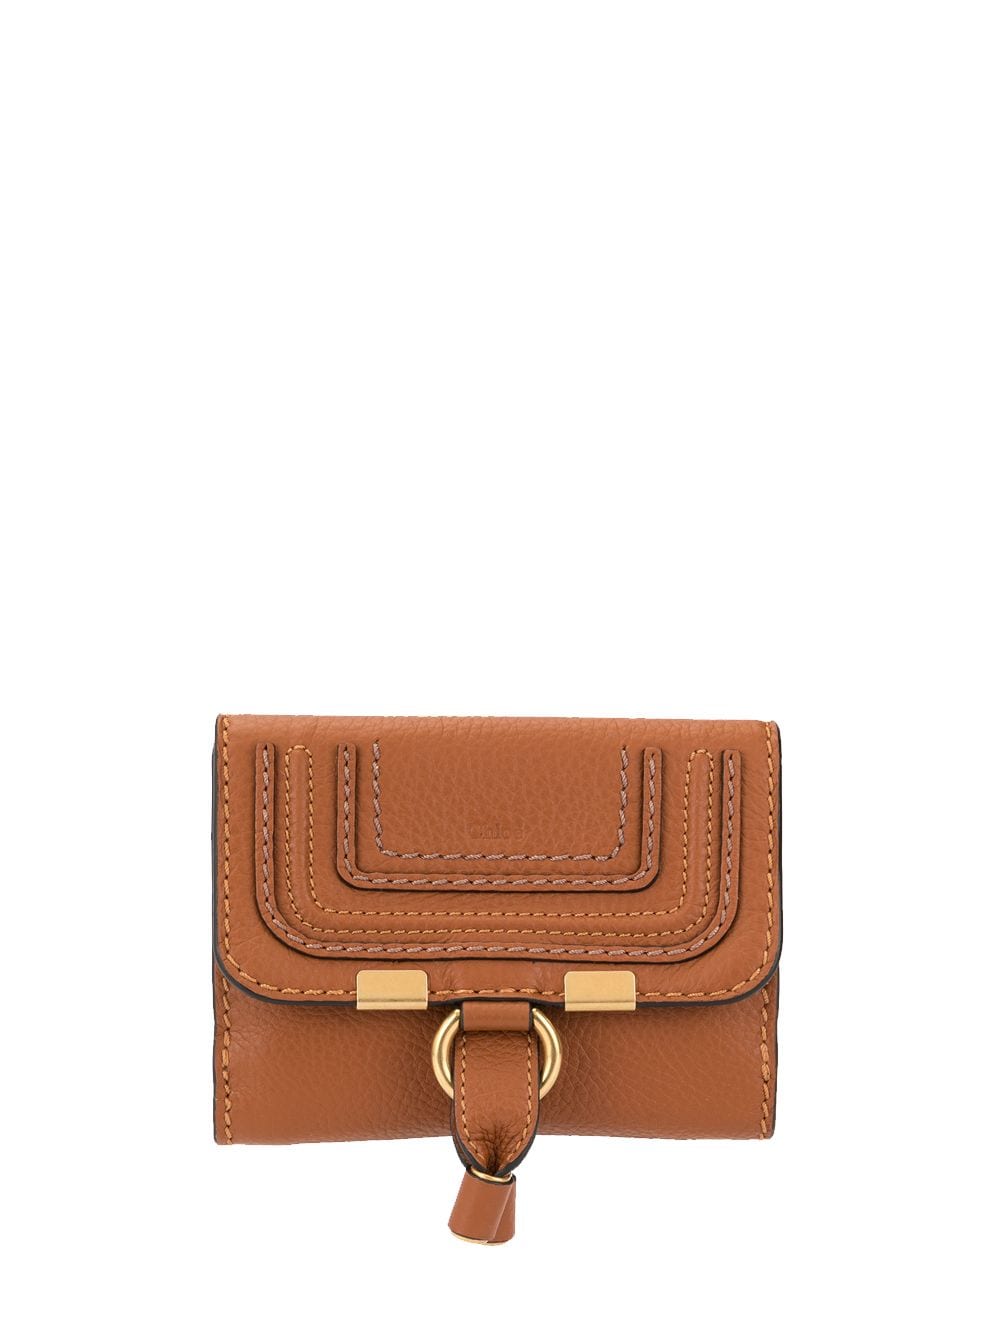 Chloé Marcie Leather Wallet In Brown